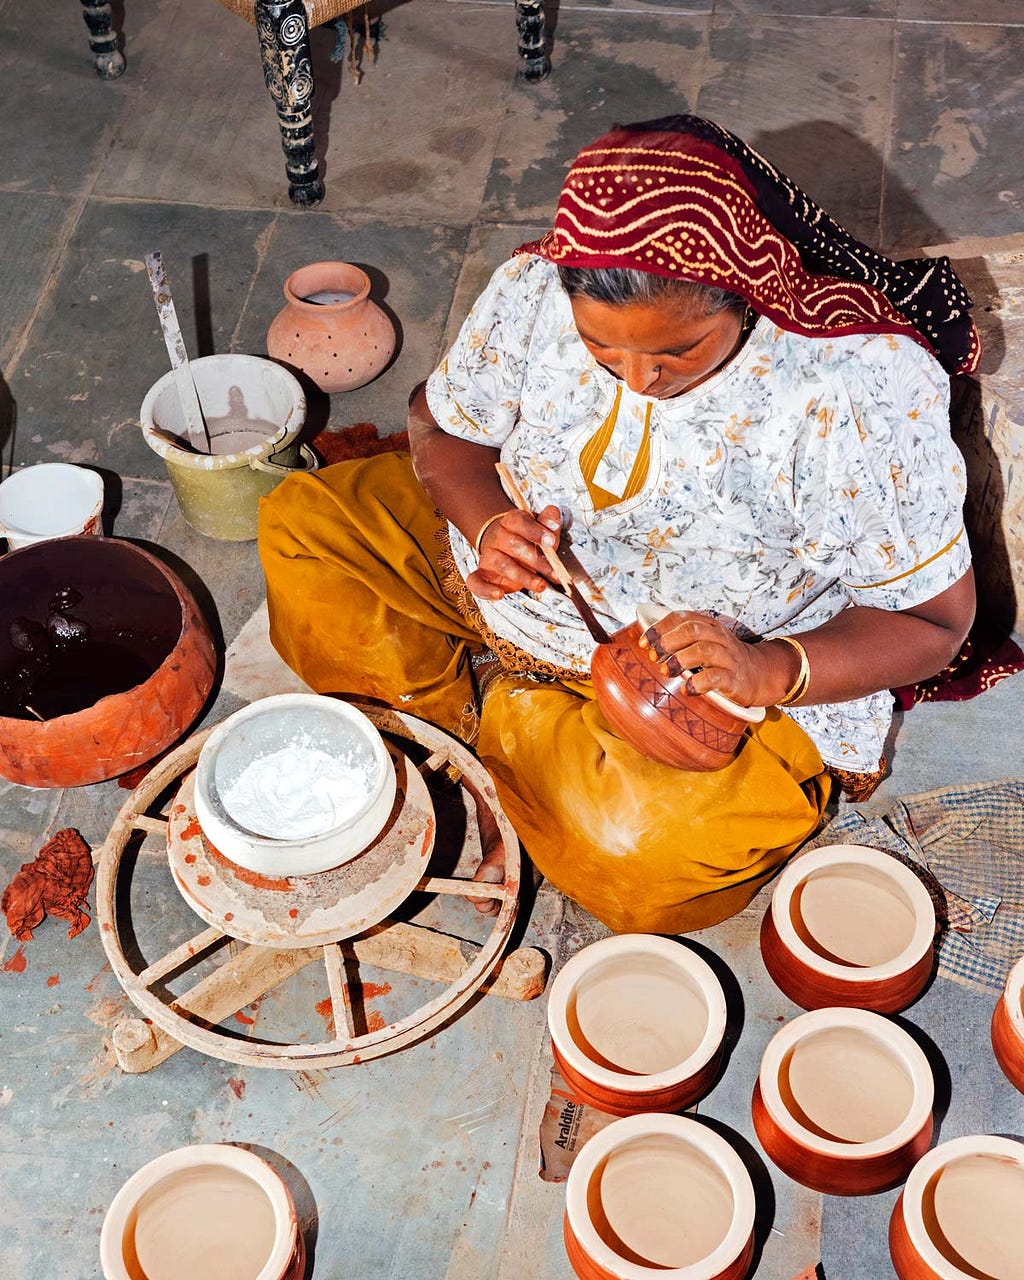 A woman sits cross-legged and paints finished pottery.